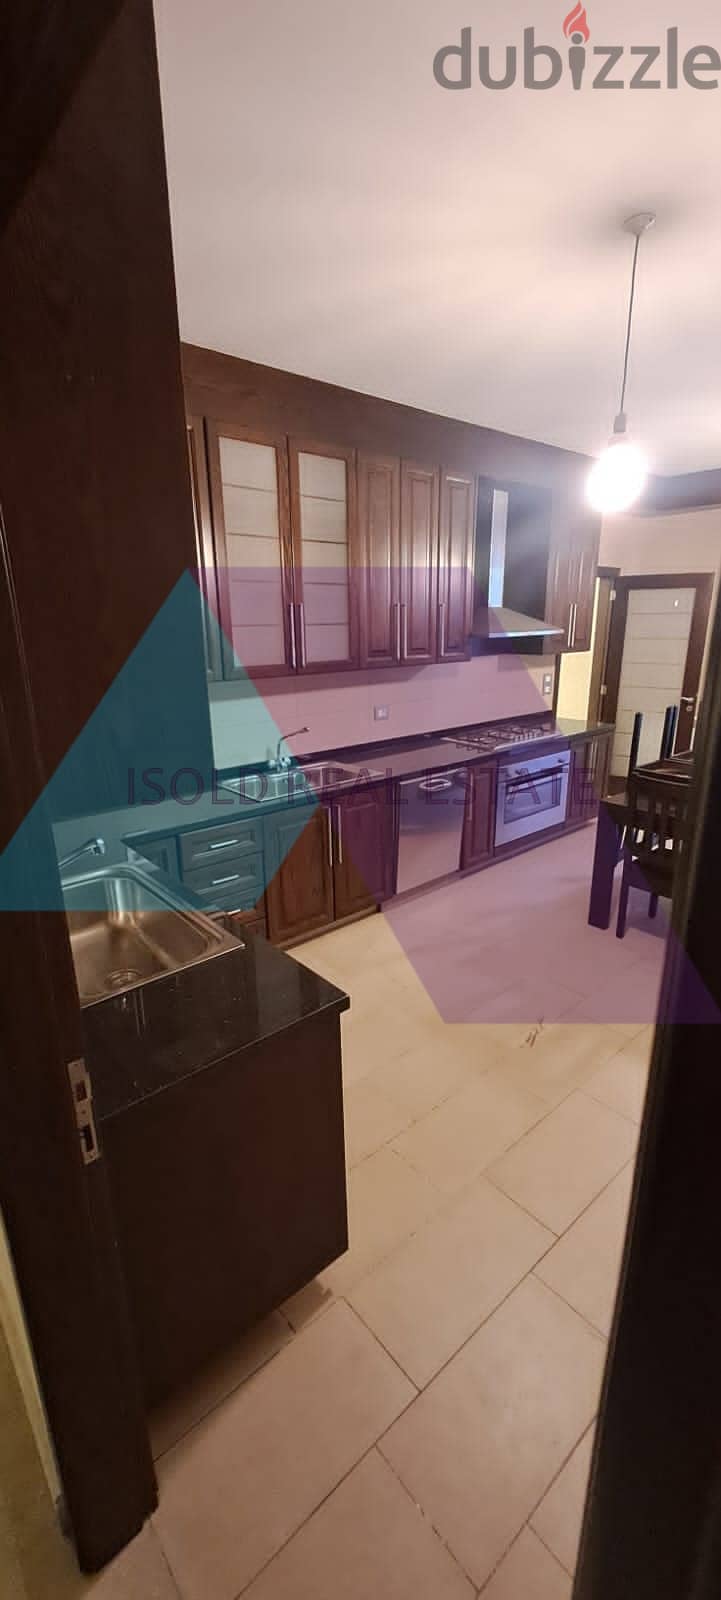 Luxurious 310 m2 apartment with 150m2 terrace for sale in Baabda 6